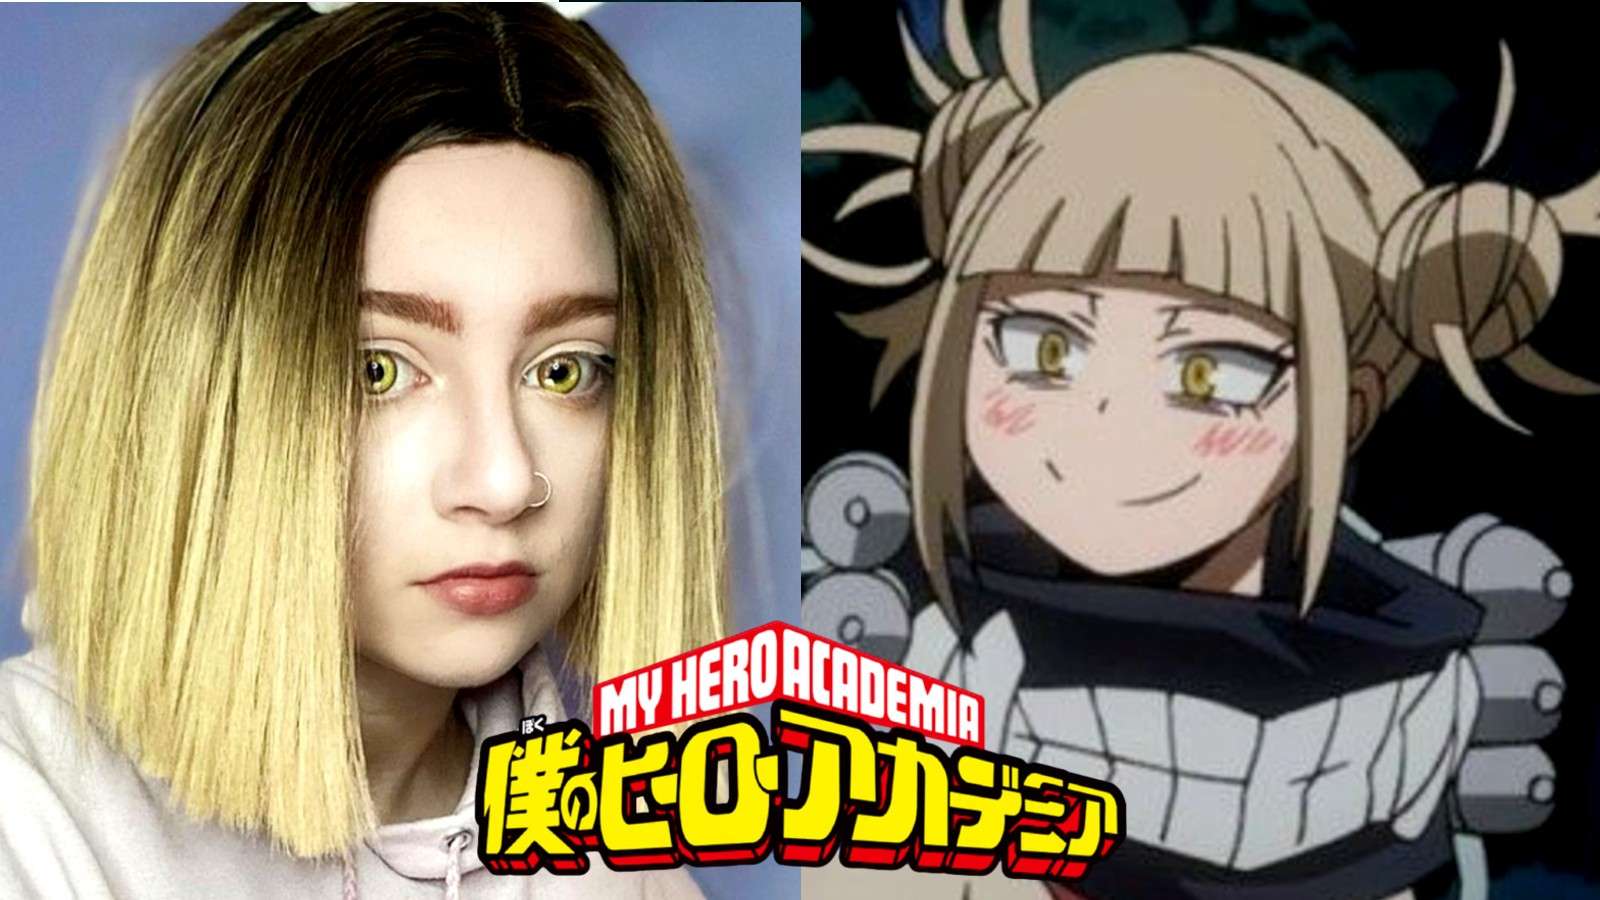 Cosplayer layvendercos next to Toga from My Hero Academia